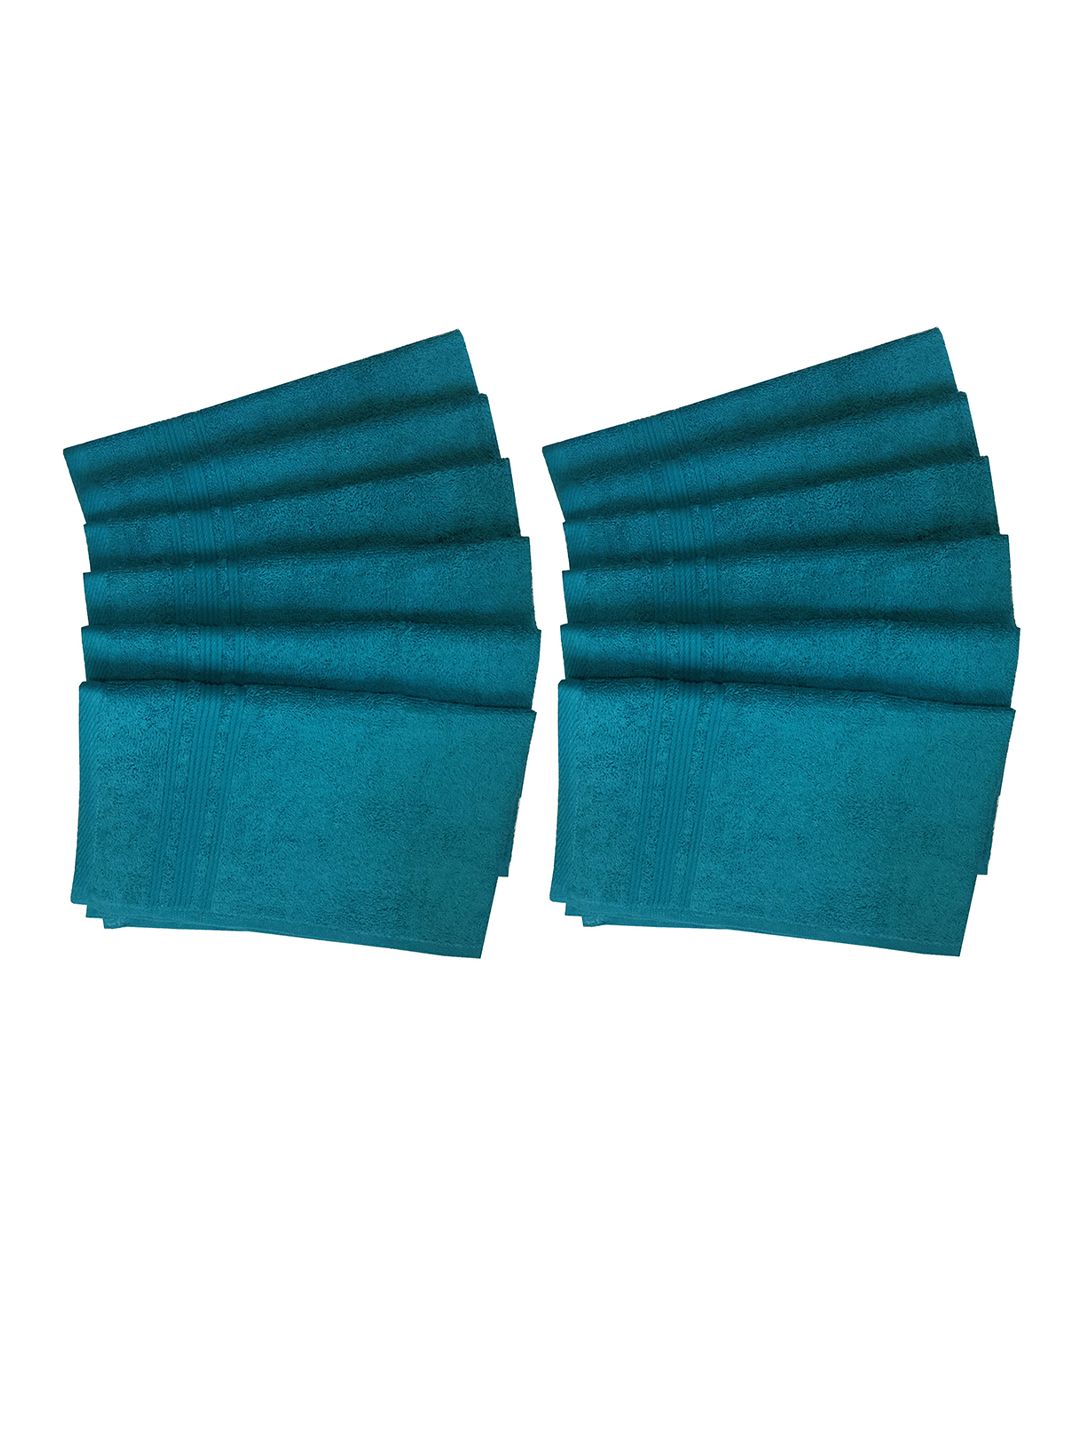 Lushomes Blue Pack of 12 450 GSM Hand Towels Price in India